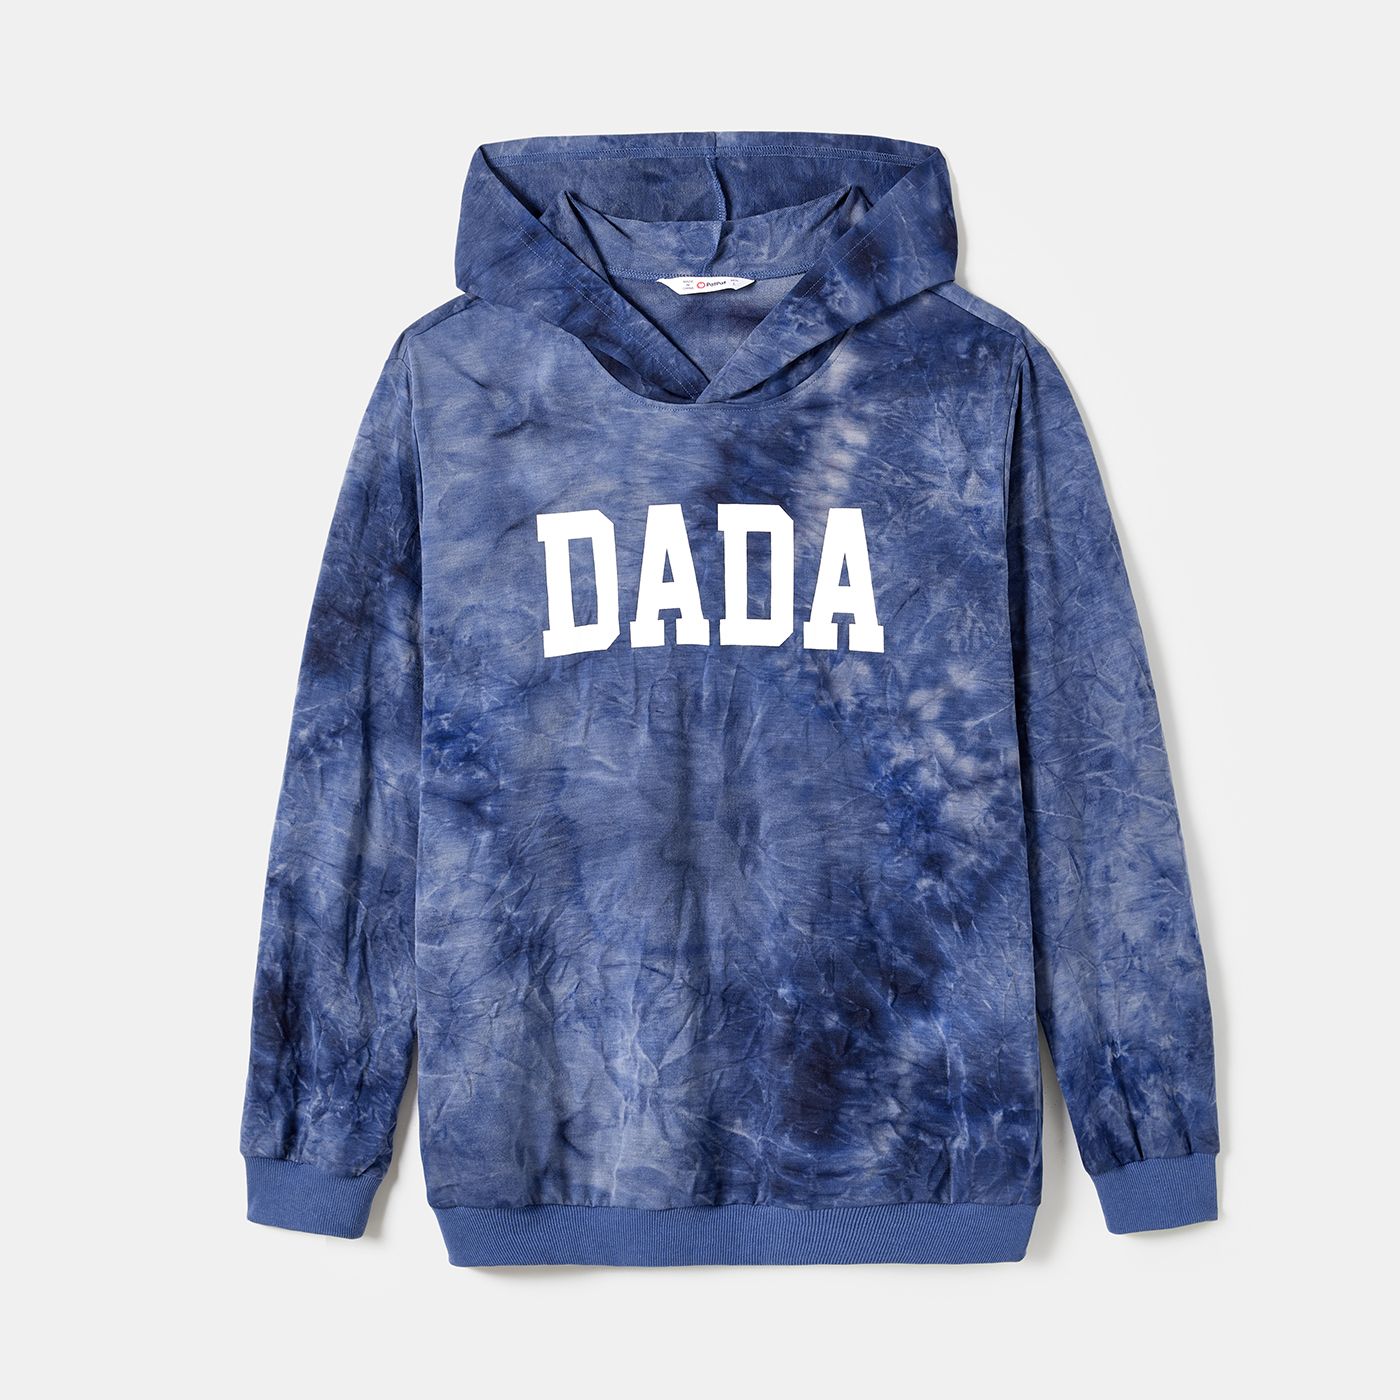 Family Matching Casual Hooded Tie-dyed Letters Print Cotton Long-sleeve Tops